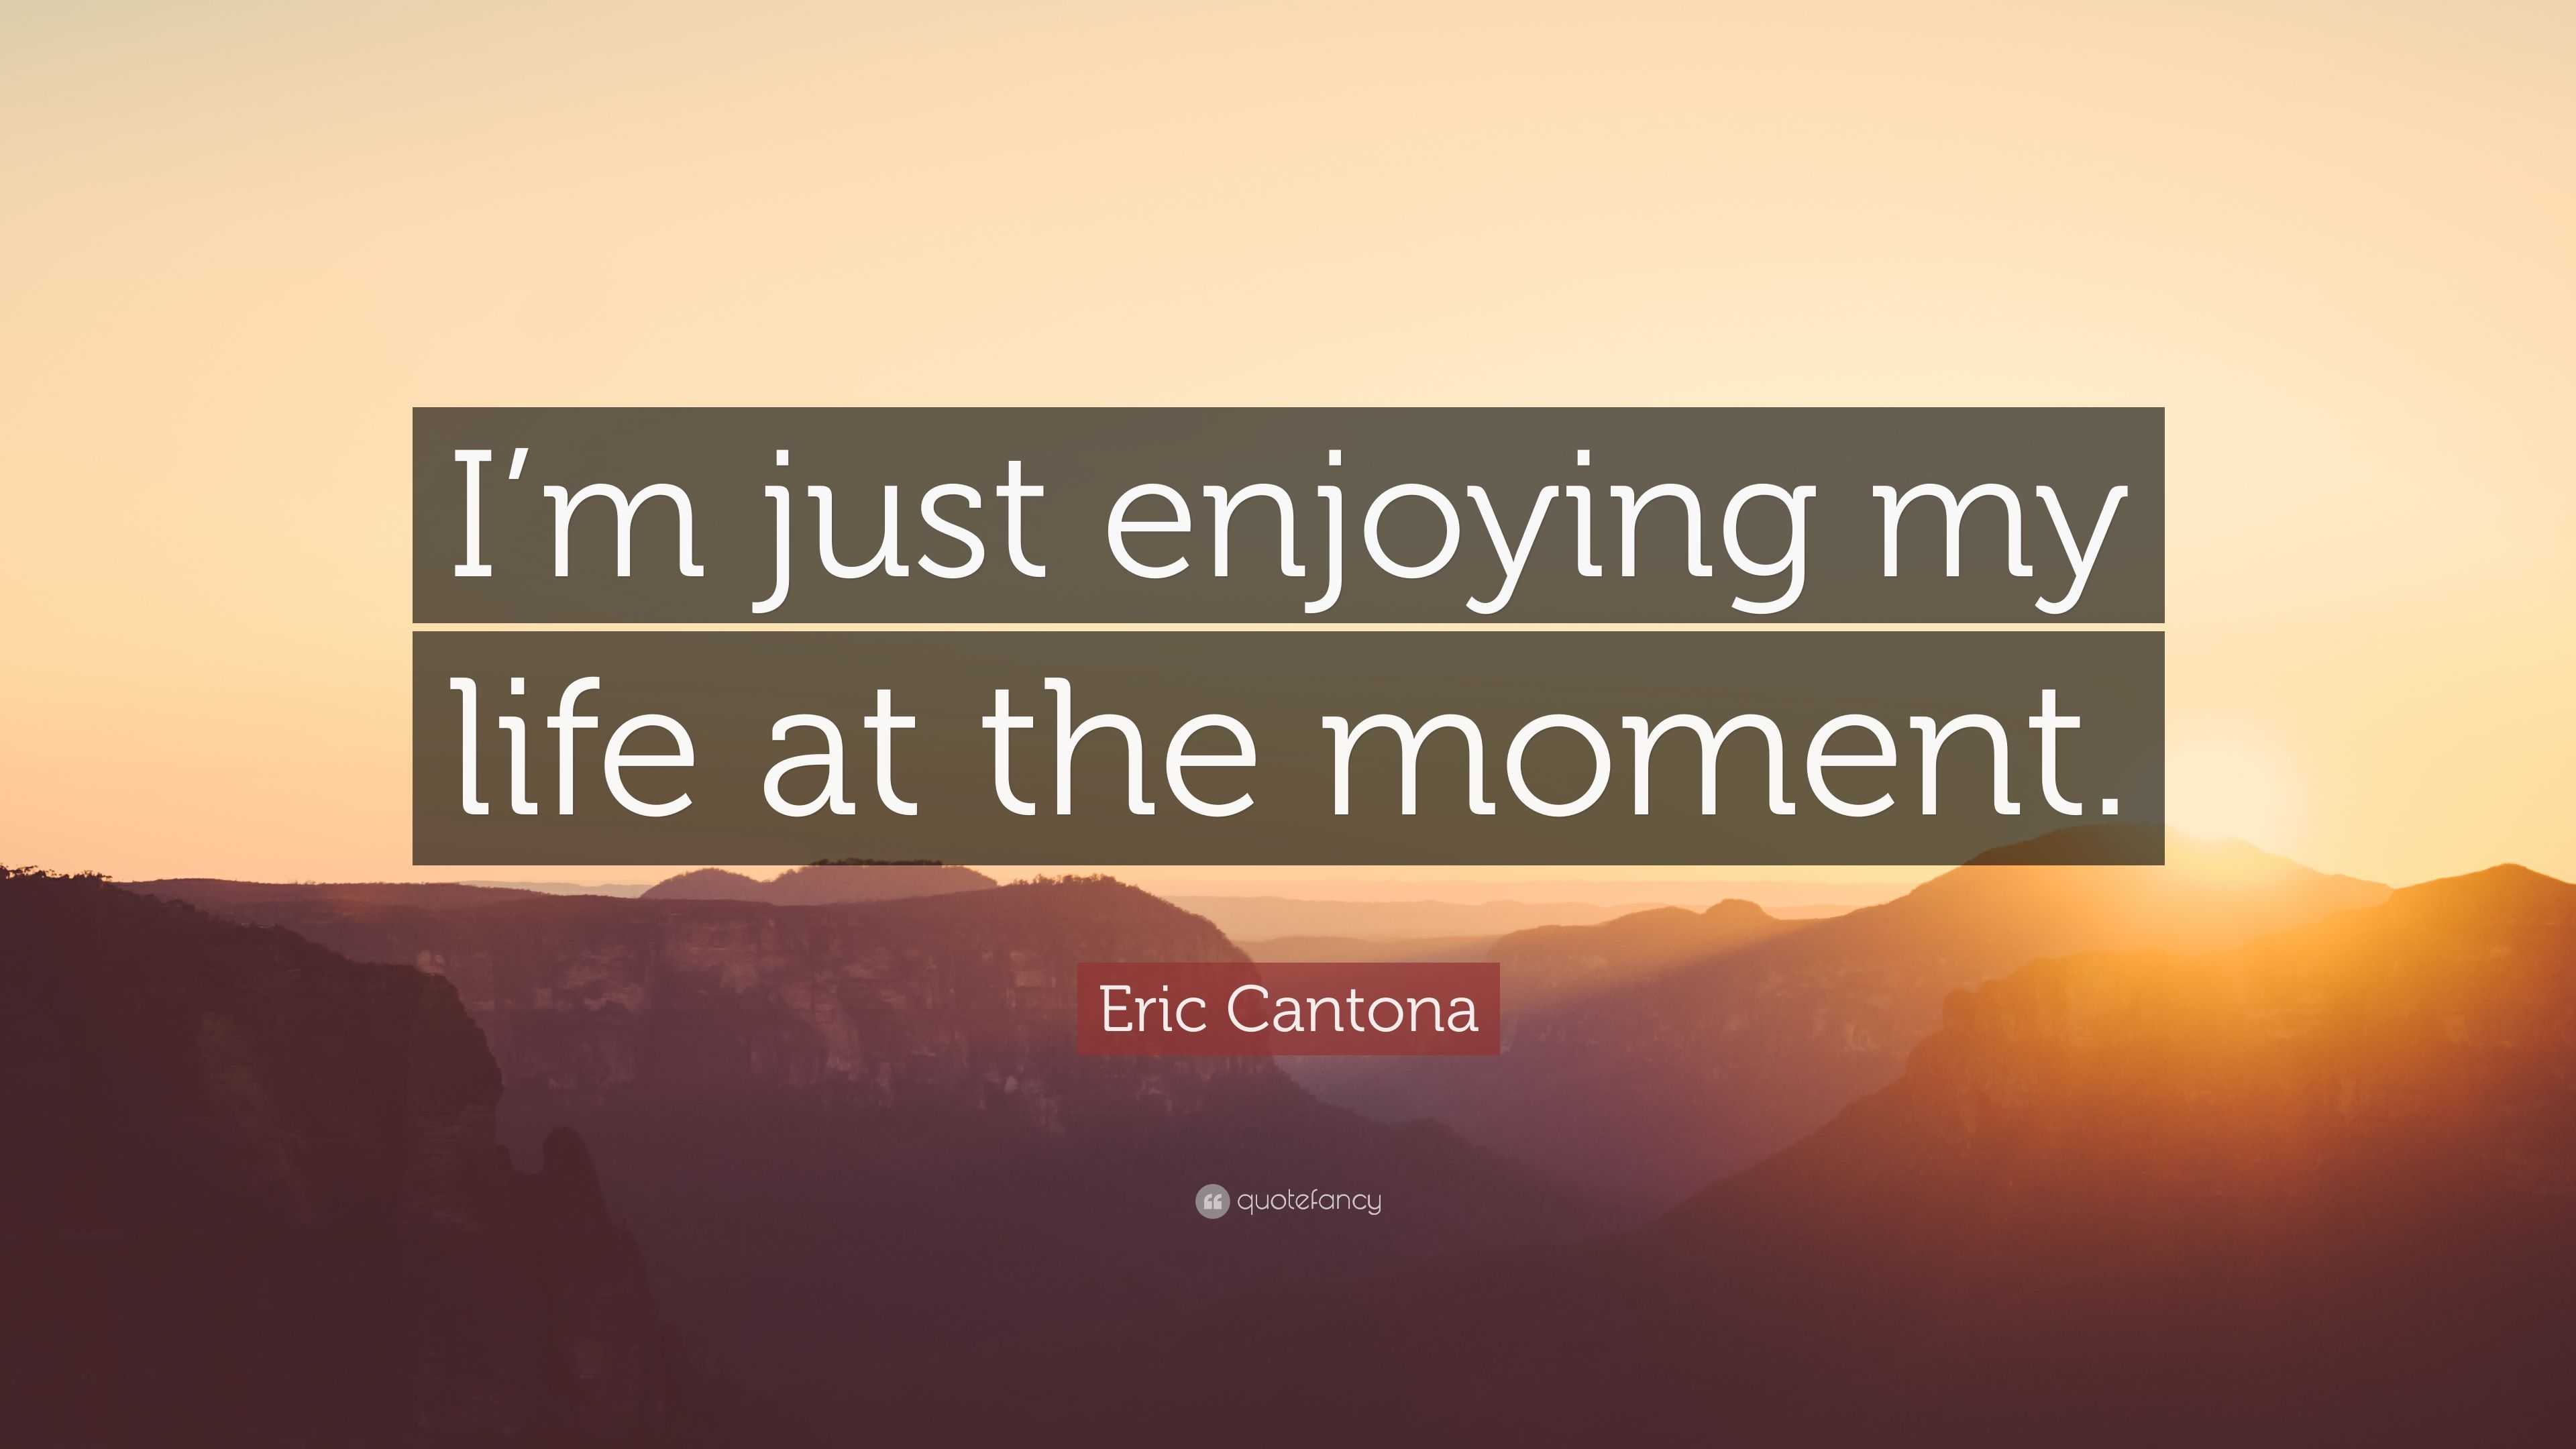 Eric Cantona Quote “I m just enjoying my life at the moment